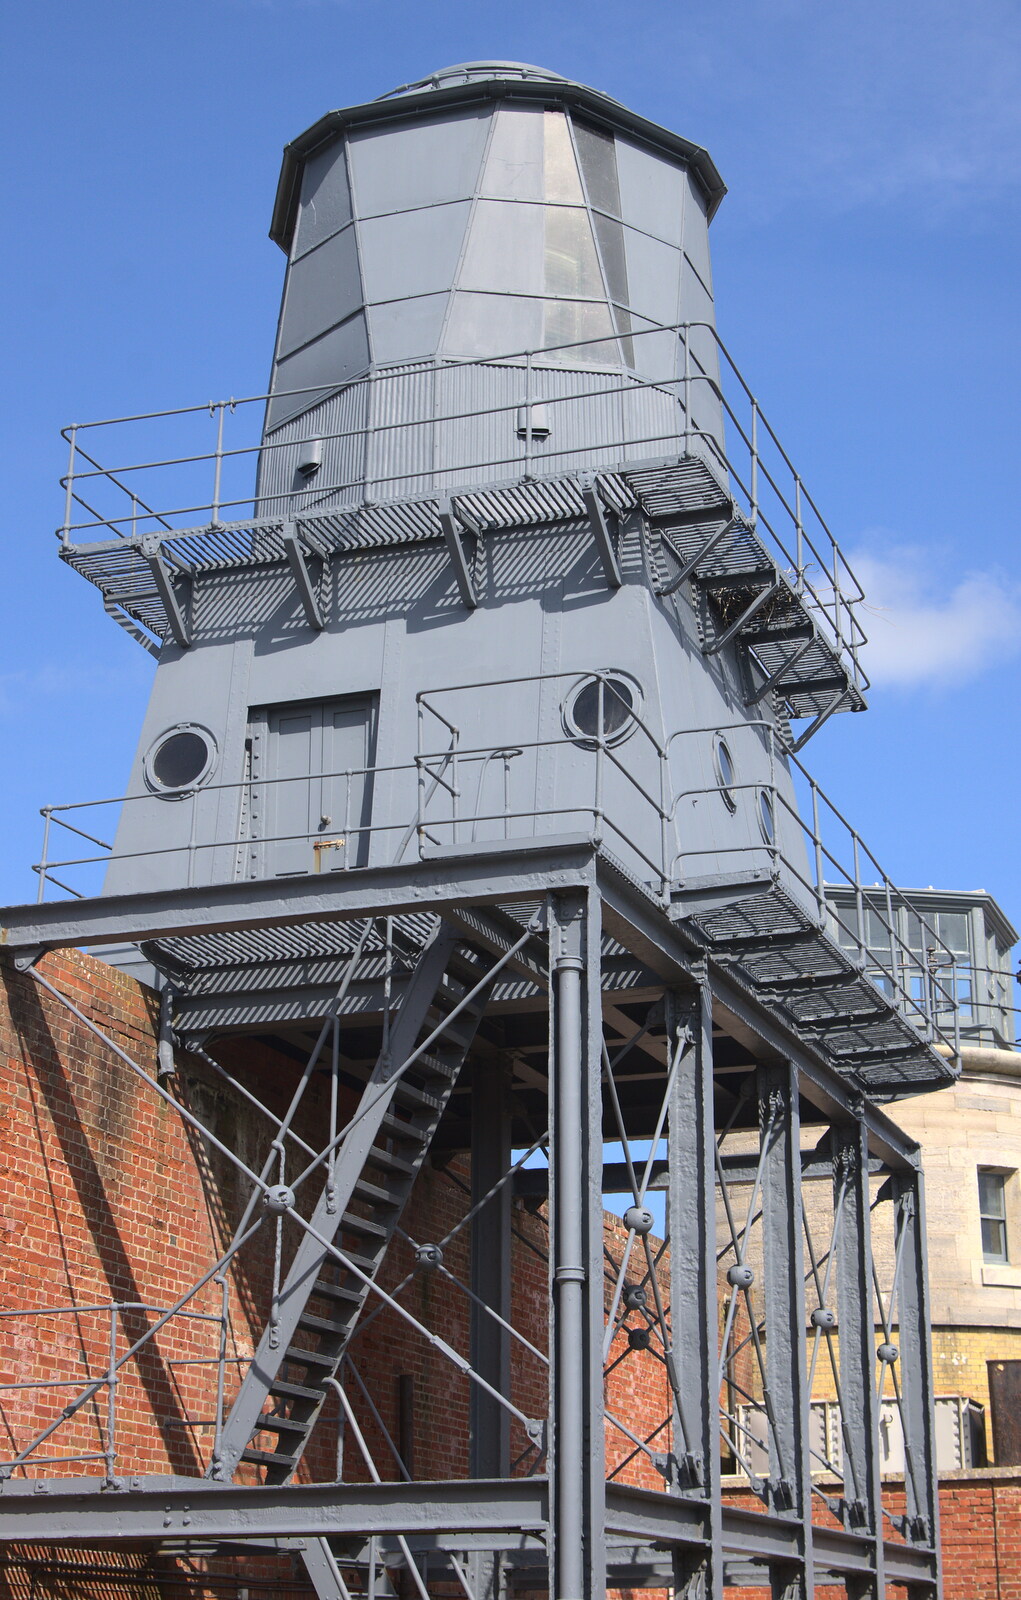 Some military construction from A Trip to Hurst Castle, Keyhaven, Hampshire - 28th August 2015